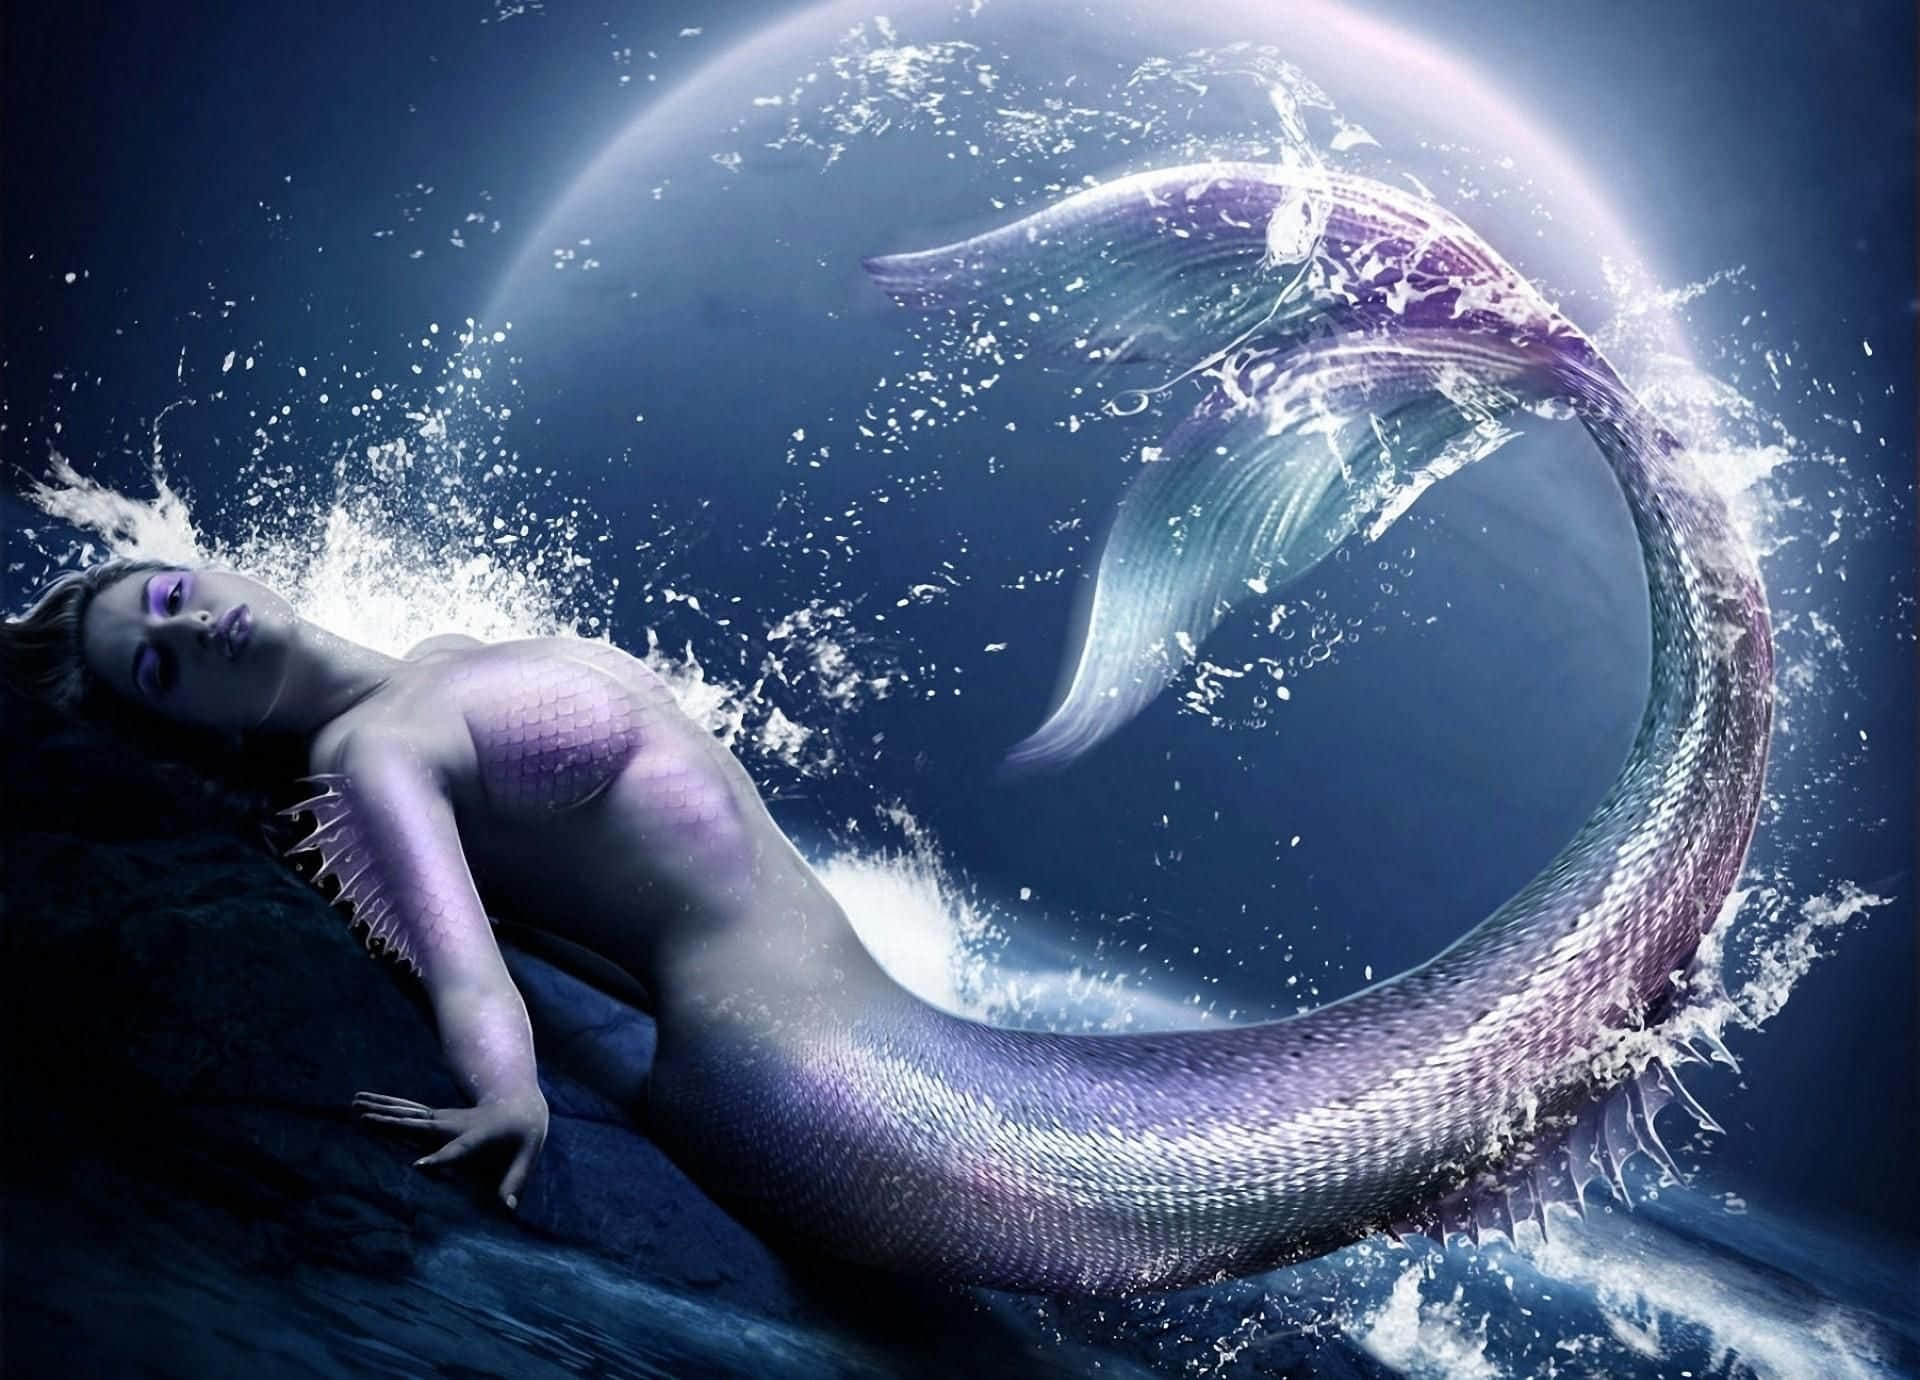 A mysterious and beautiful Real Mermaid captured in a photo Wallpaper